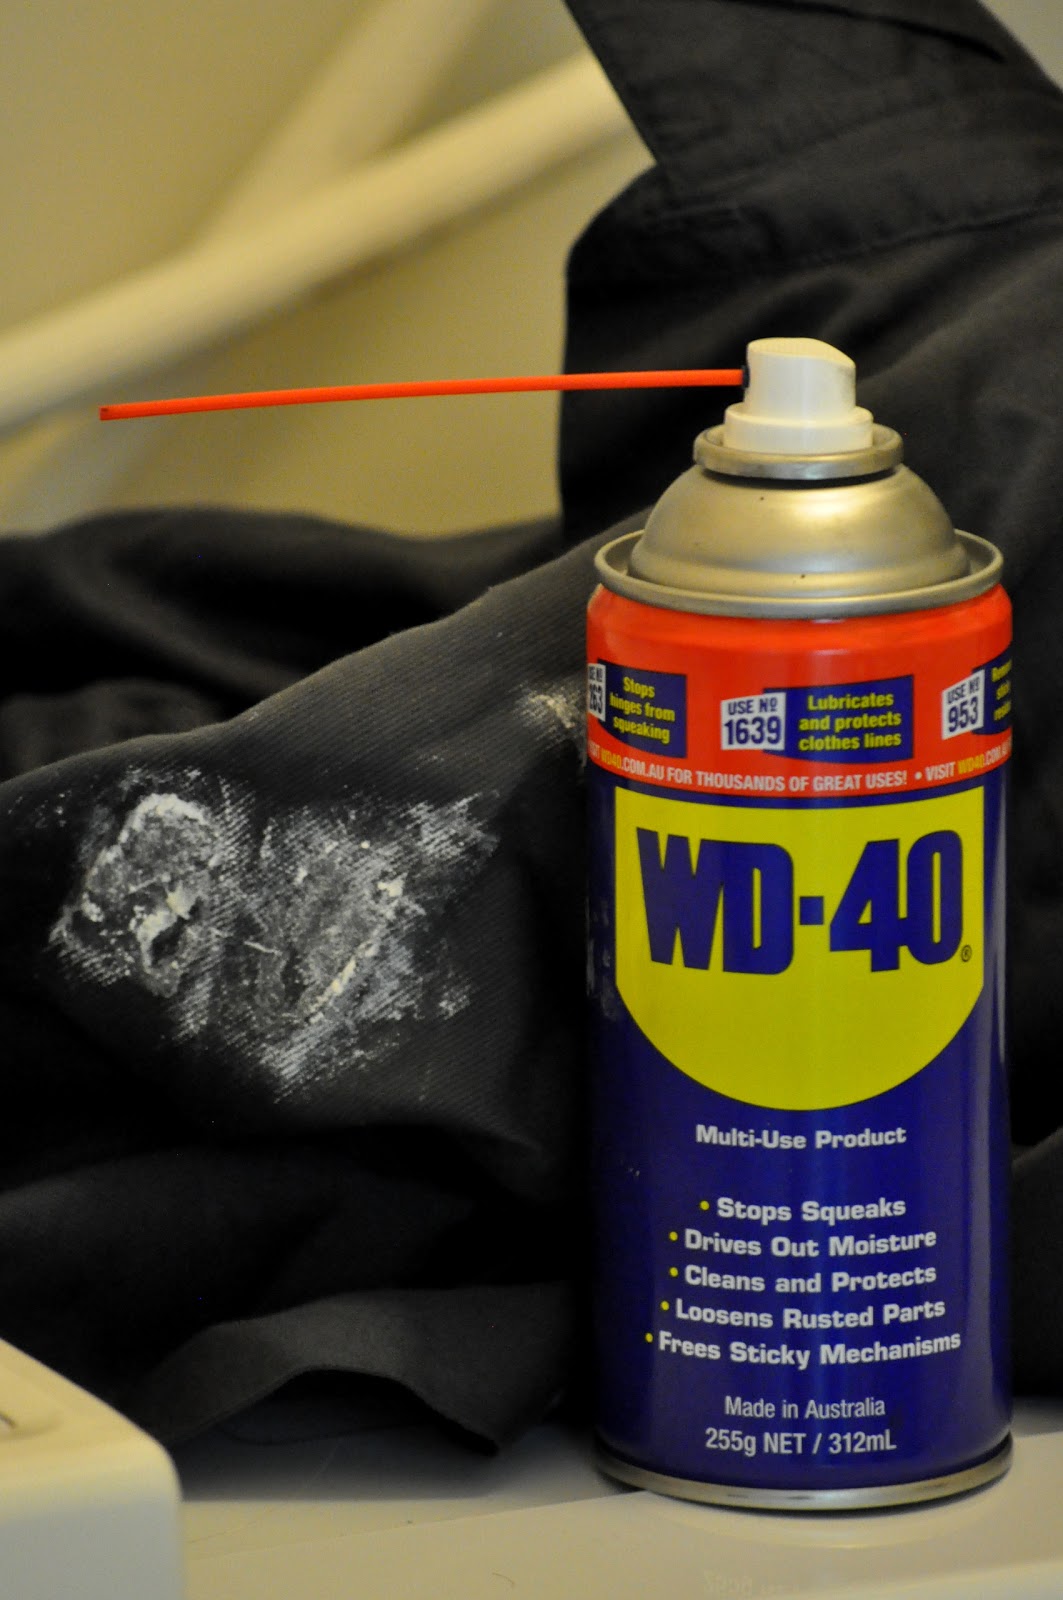 frenetic rapport: Removing Chewing Gum From Clothes With WD-40